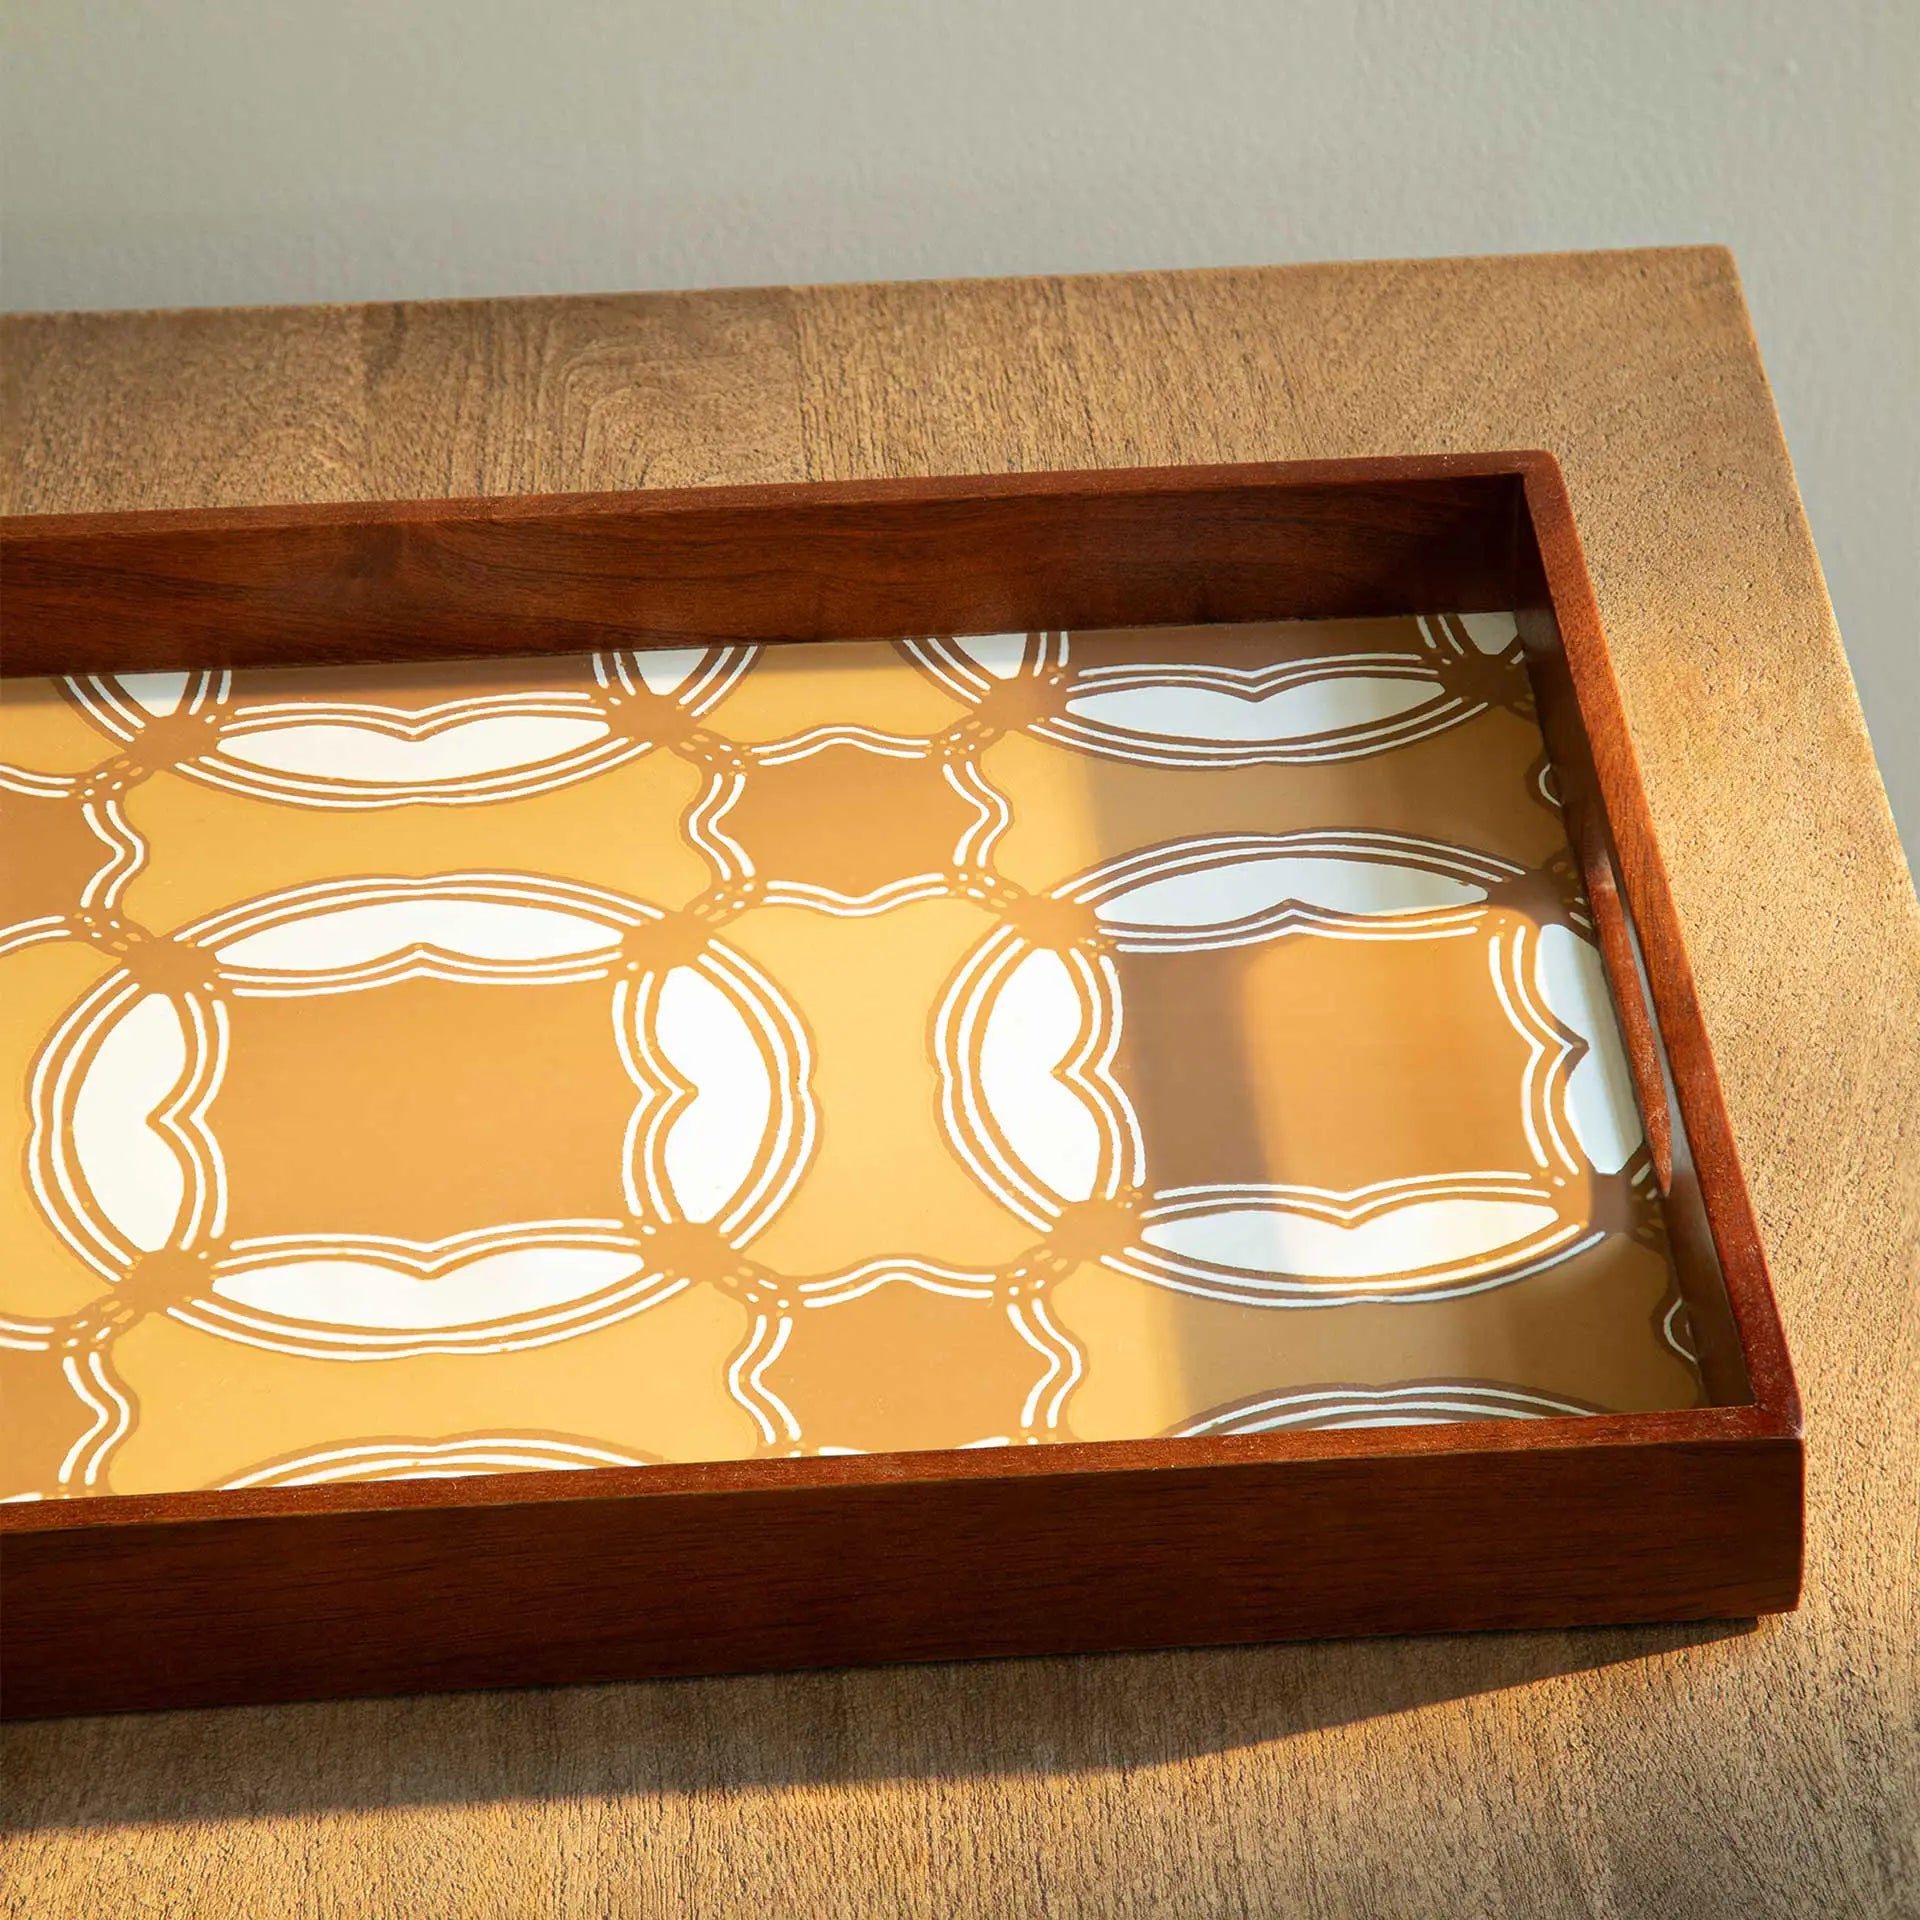 Wooden Handcrafted Tray - Brown